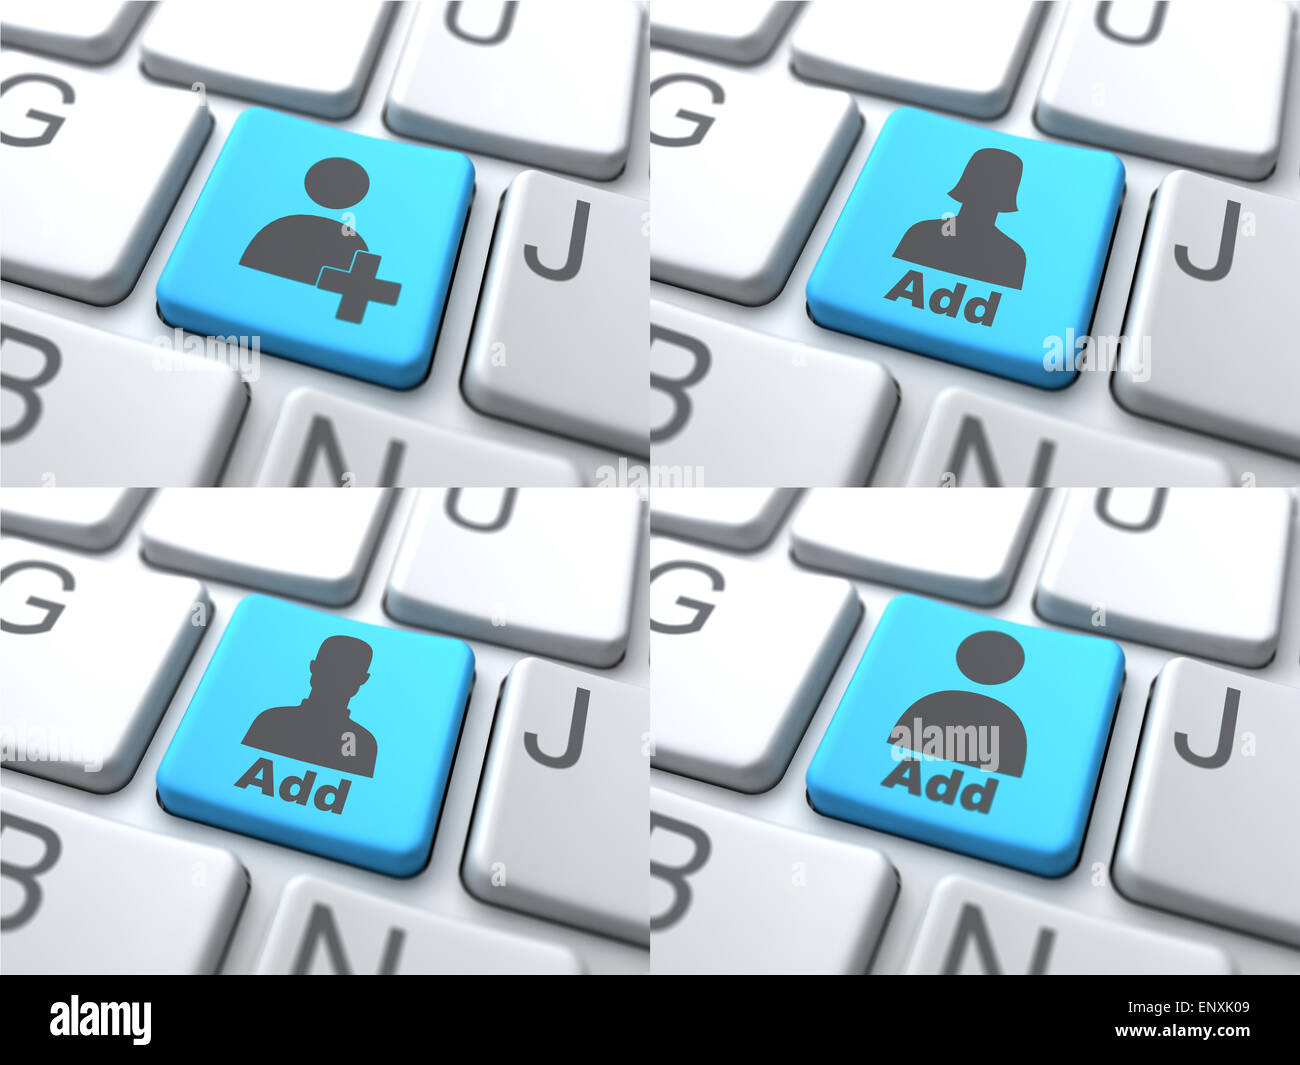 Add Concept - Blue Button on Keyboard. Stock Photo